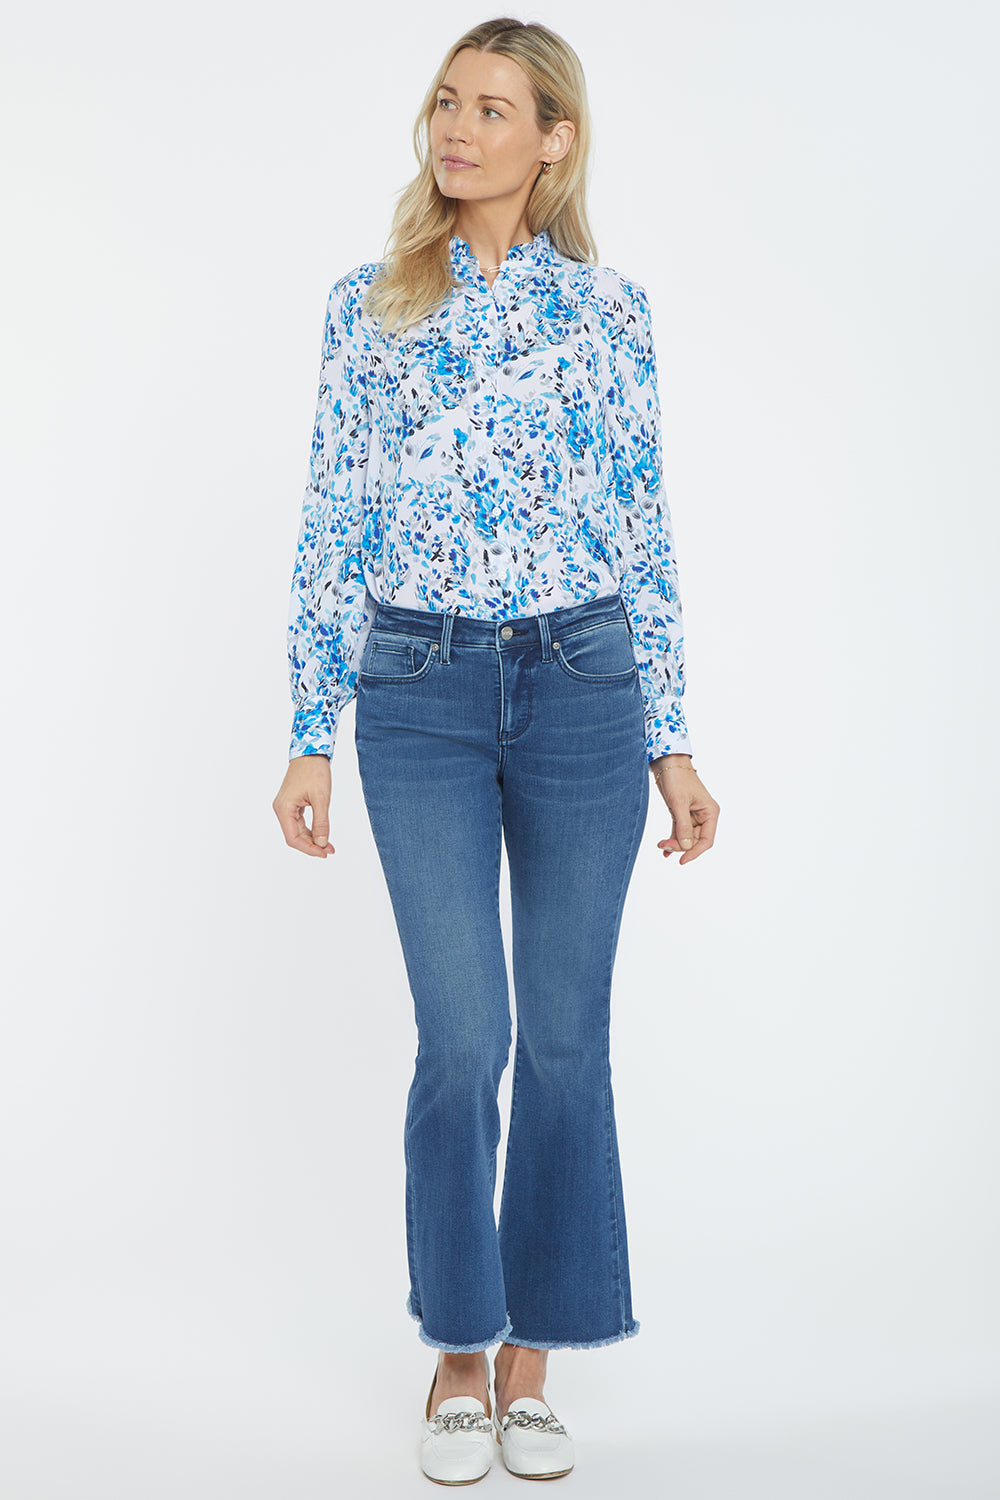 NYDJ Ava Flared Ankle Jeans With Frayed Hems - Foundry